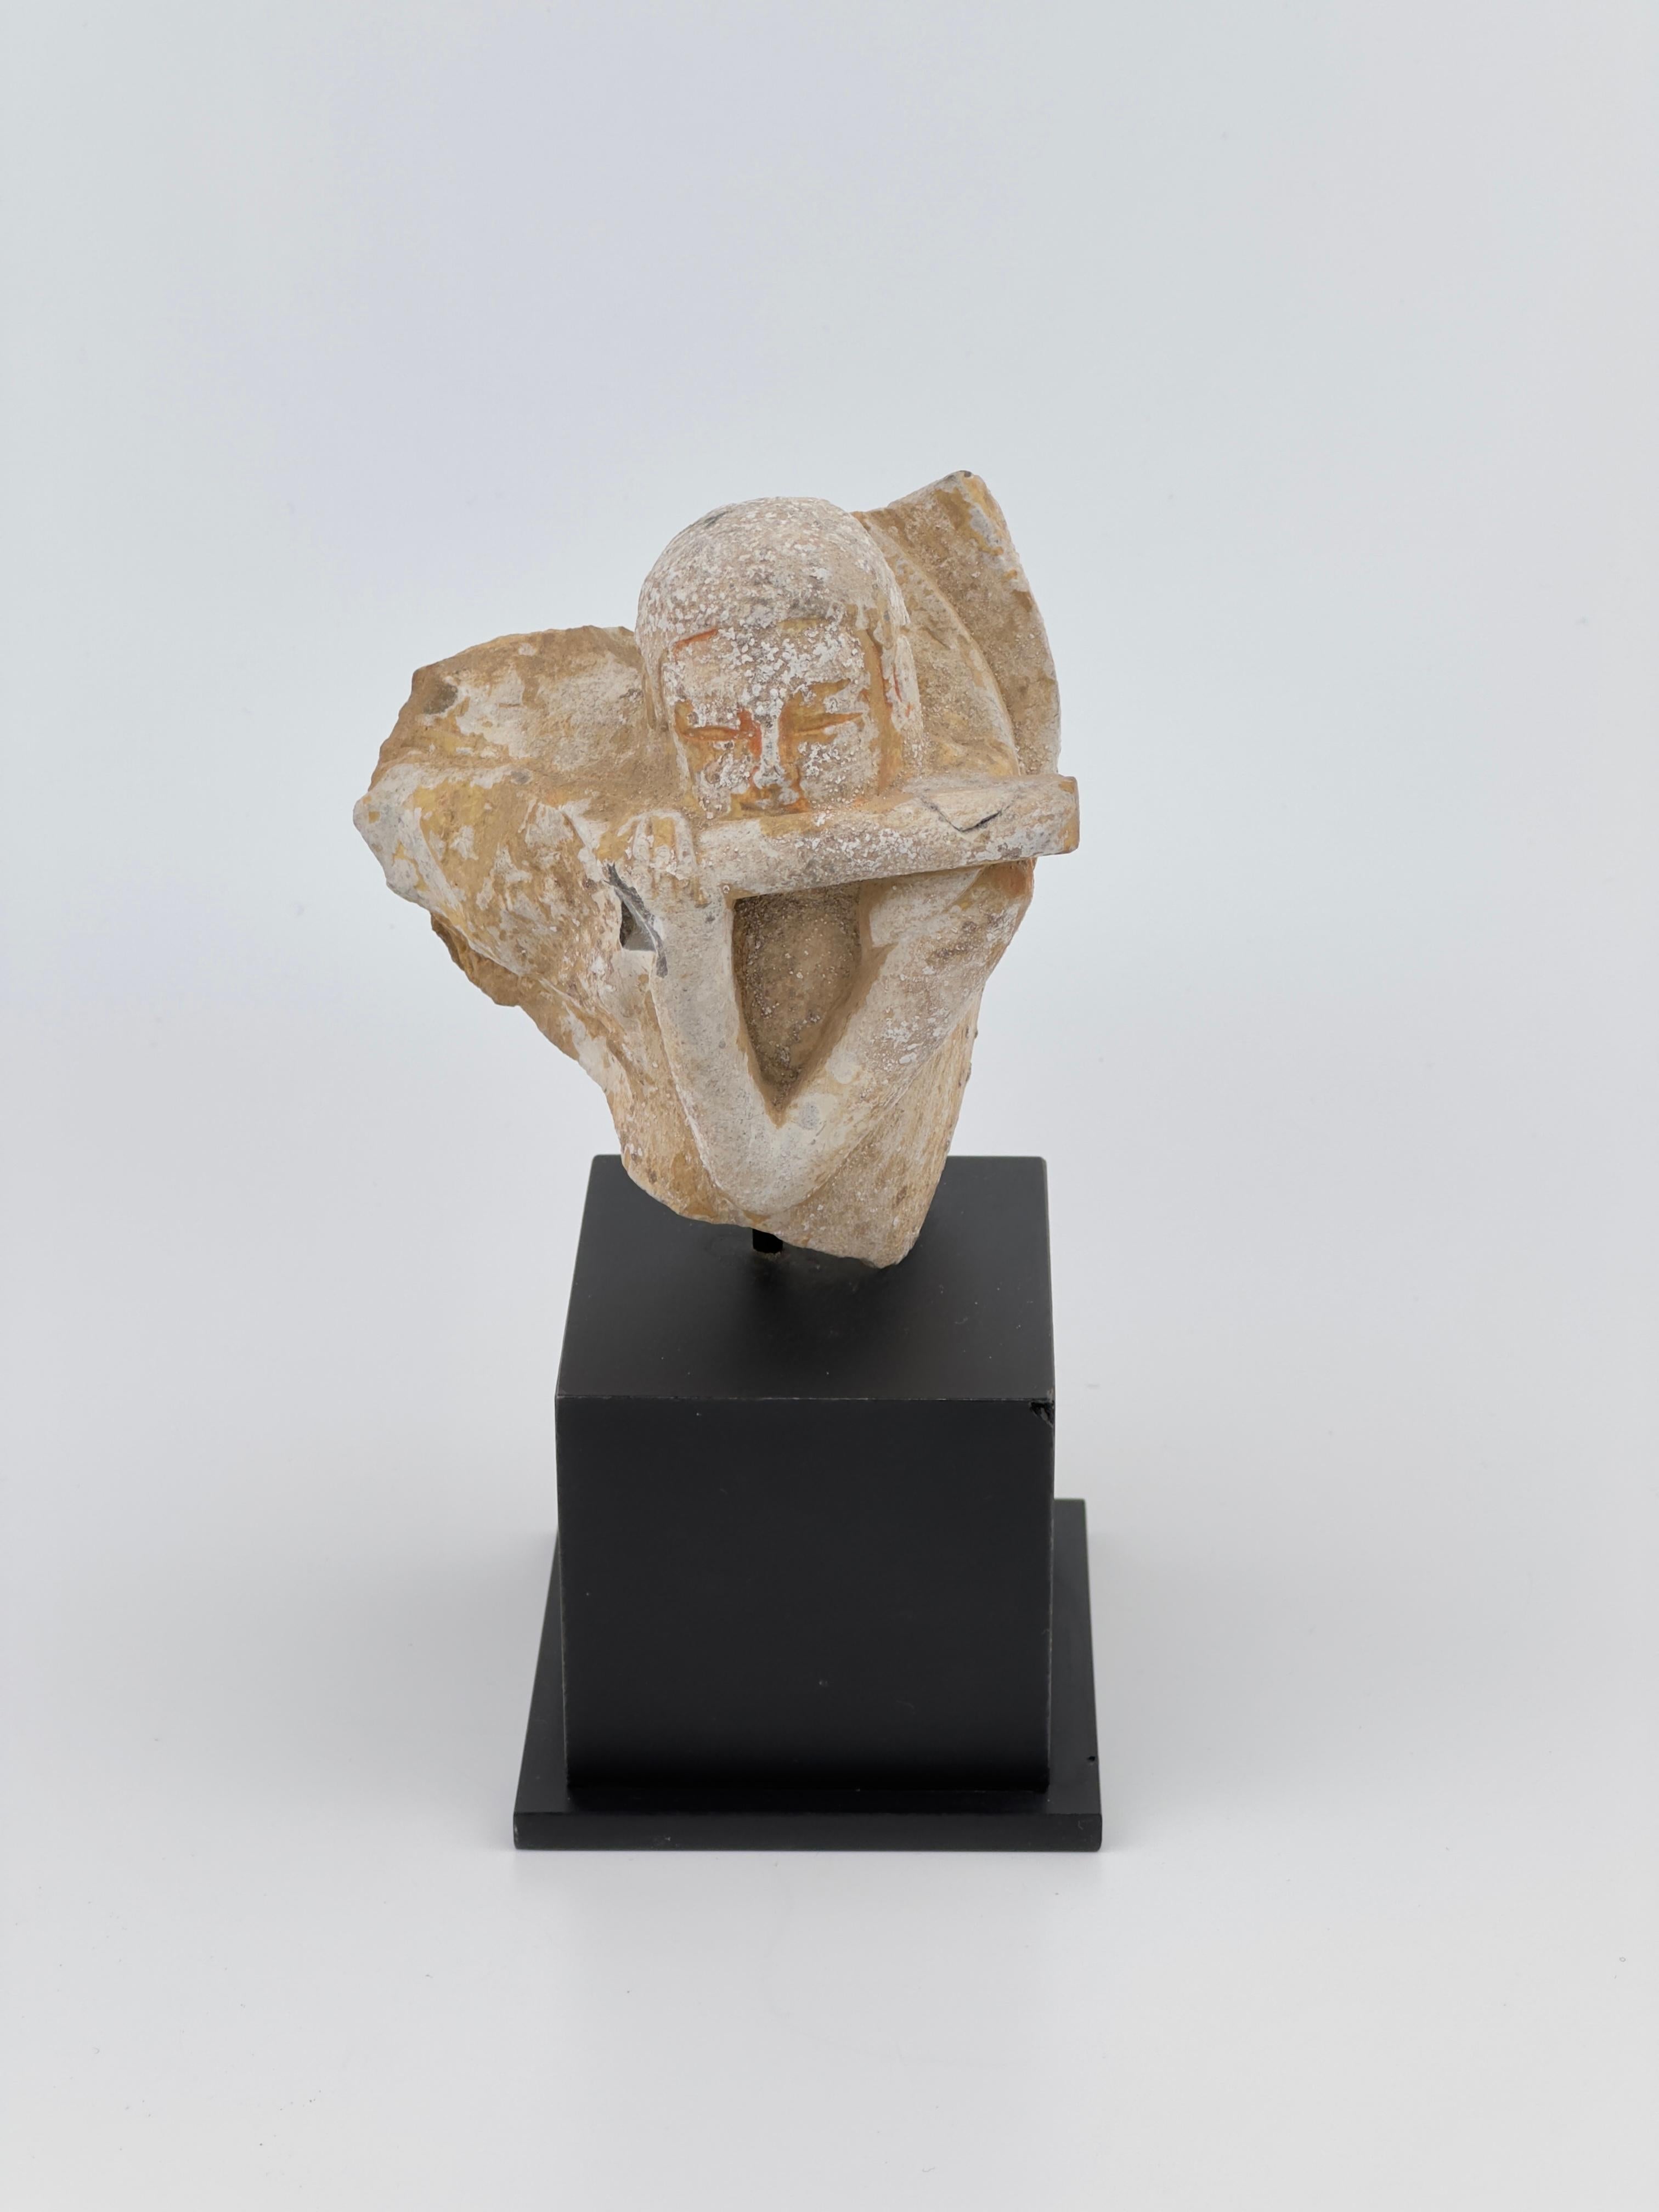 This statue appears to be a stone sculpture of an apsara, a celestial nymph from Buddhist and Hindu traditions. Despite its fragmentary state, the sculpture conveys grace and movement. The apsara is captured in a dynamic pose, perhaps once part of a